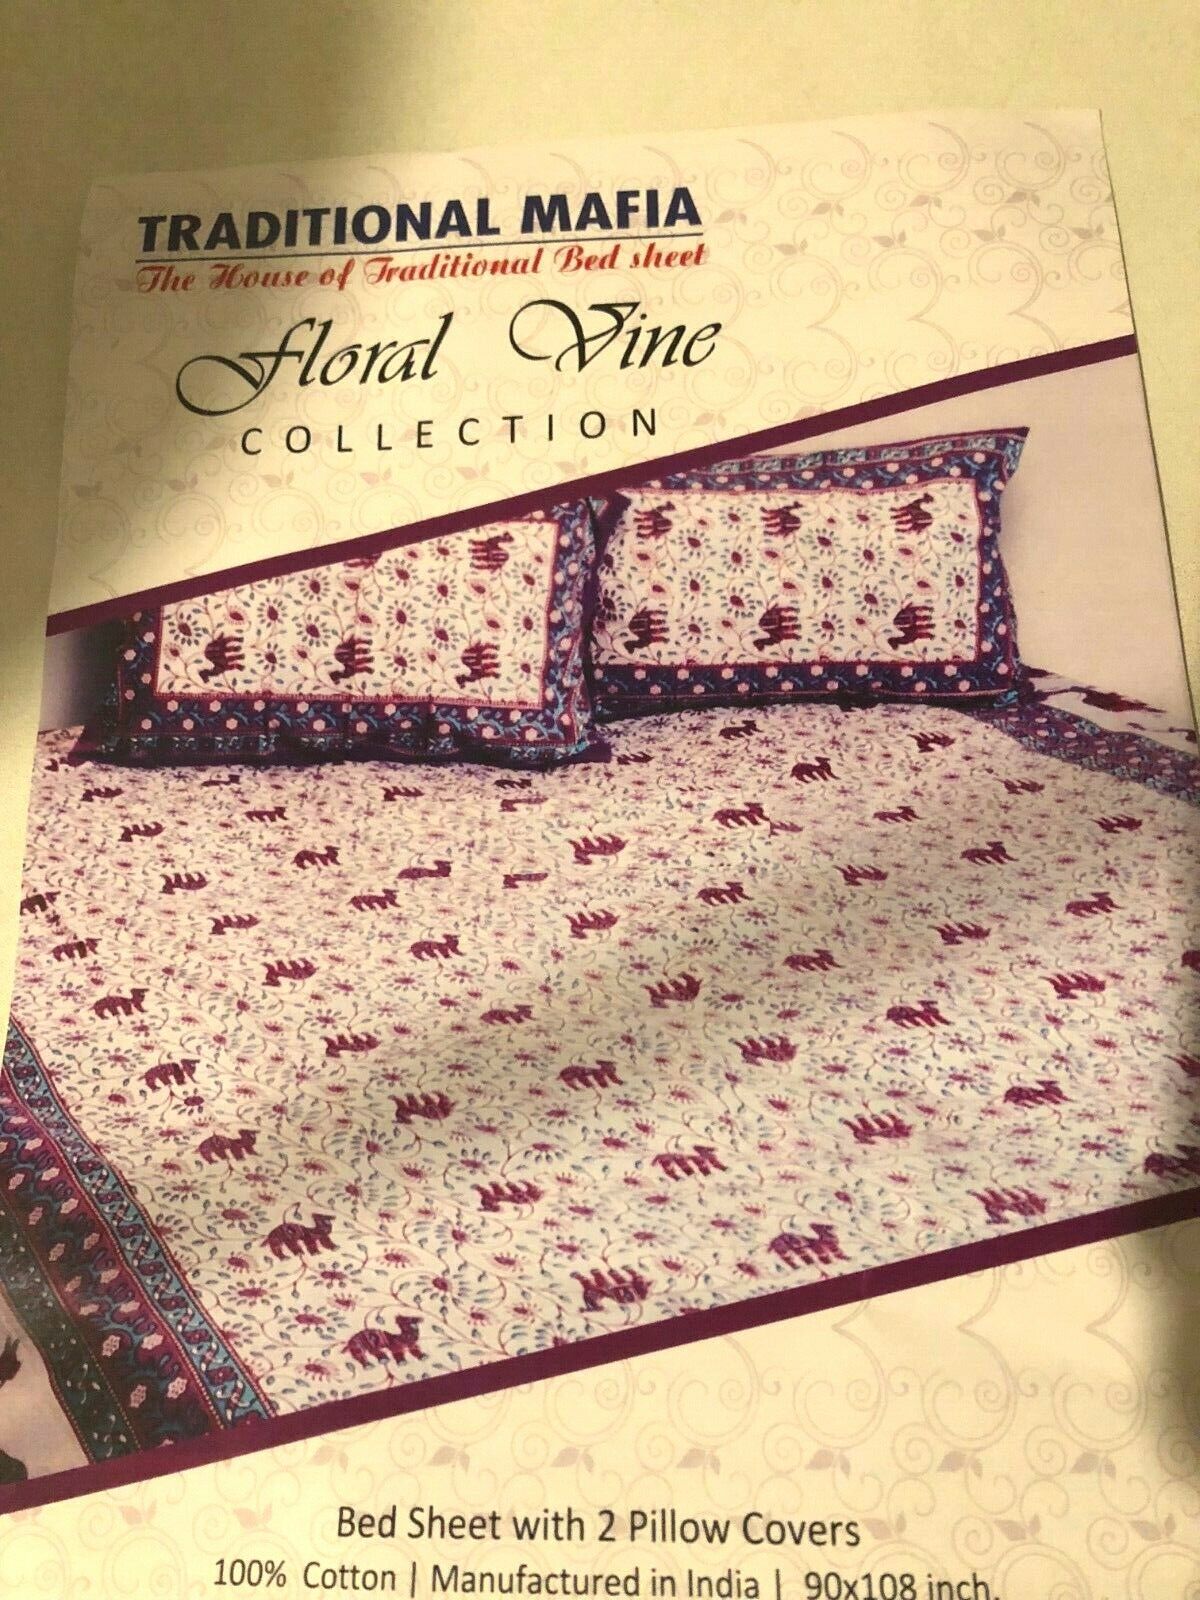 TRADITIONAL MAFIA FLORAL VINE COLLECTION BED SHEET W/ 2 PILLOW COVERS KING SET TRADITIONAL MAFIA FLORAL VINE